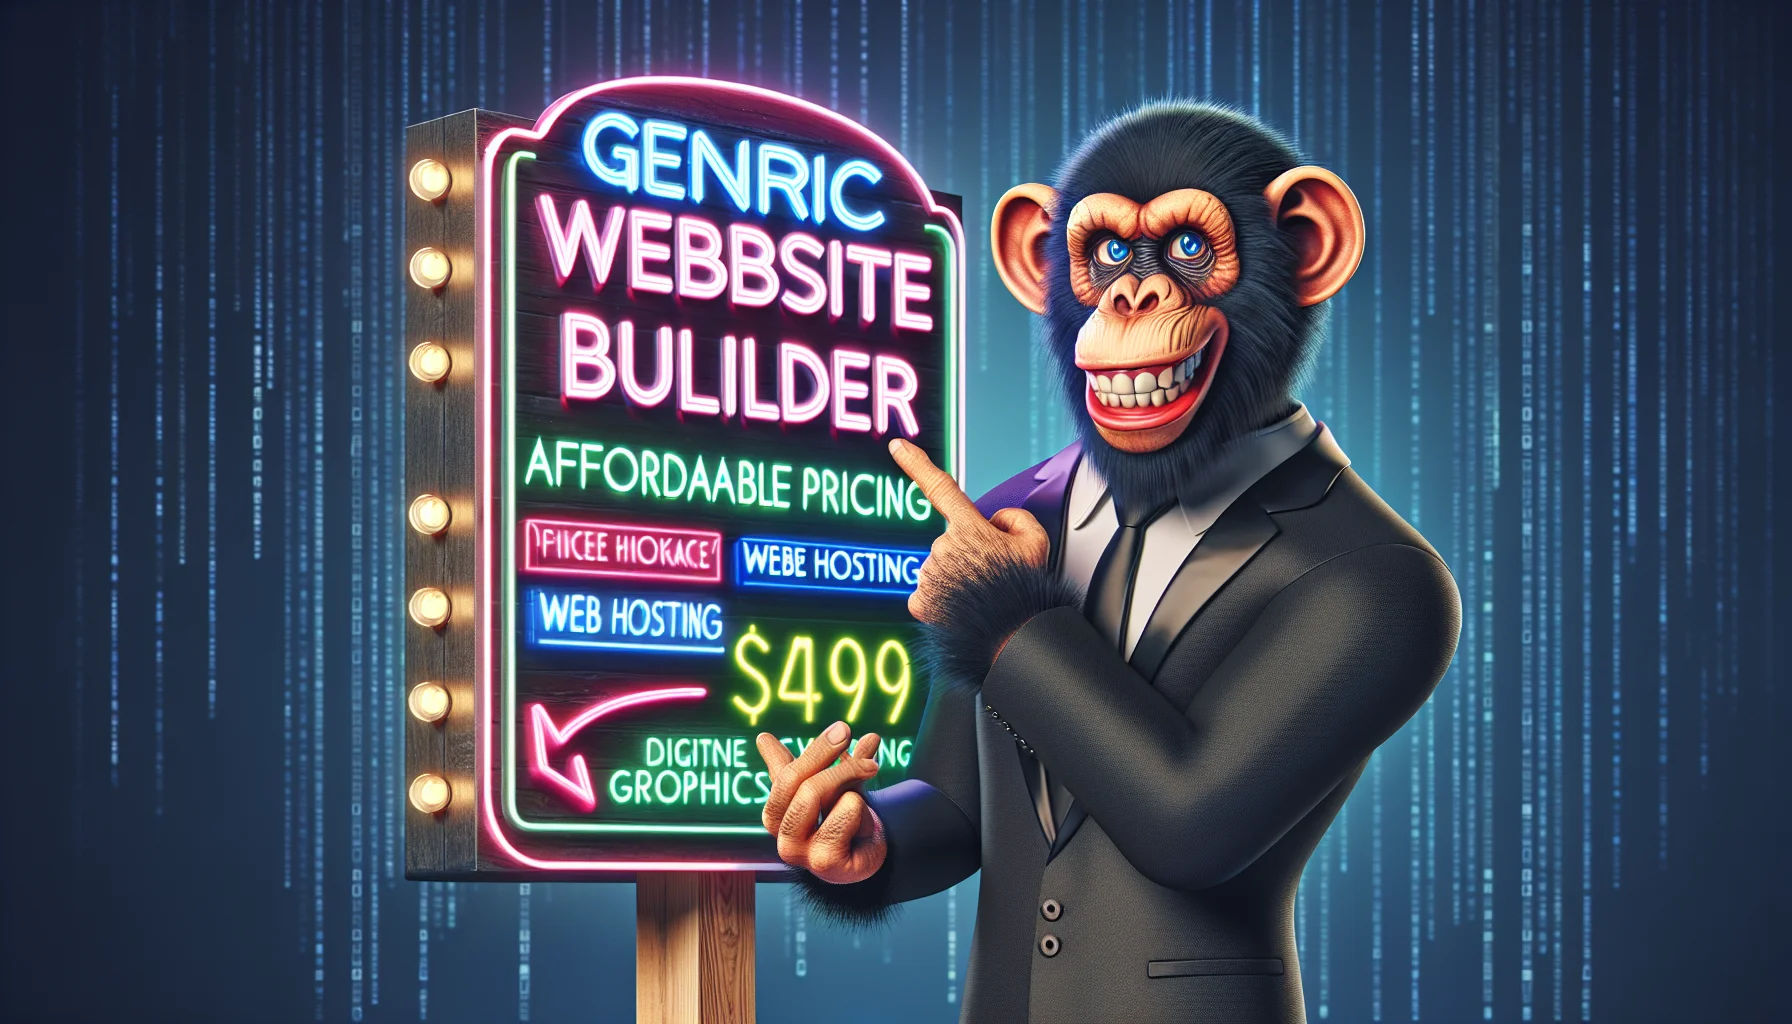 Conjure up a humorous and attention-grabbing scenario revolving around the pricing of a generic chimpanzee-themed website builder. In this imagery, include the anthropomorphic, playful chimpanzee cartoon character in a suit, acting as a digital salesman. The chimp pointing to a flashy neon sign that hilariously exaggerates the affordable pricing benefits, quirkily designed to be reminiscent of classic roadside attractions. Meanwhile, a digital matrix in the background symbolizes web hosting. Remember to emphasize enticing graphics around the online process of website building.